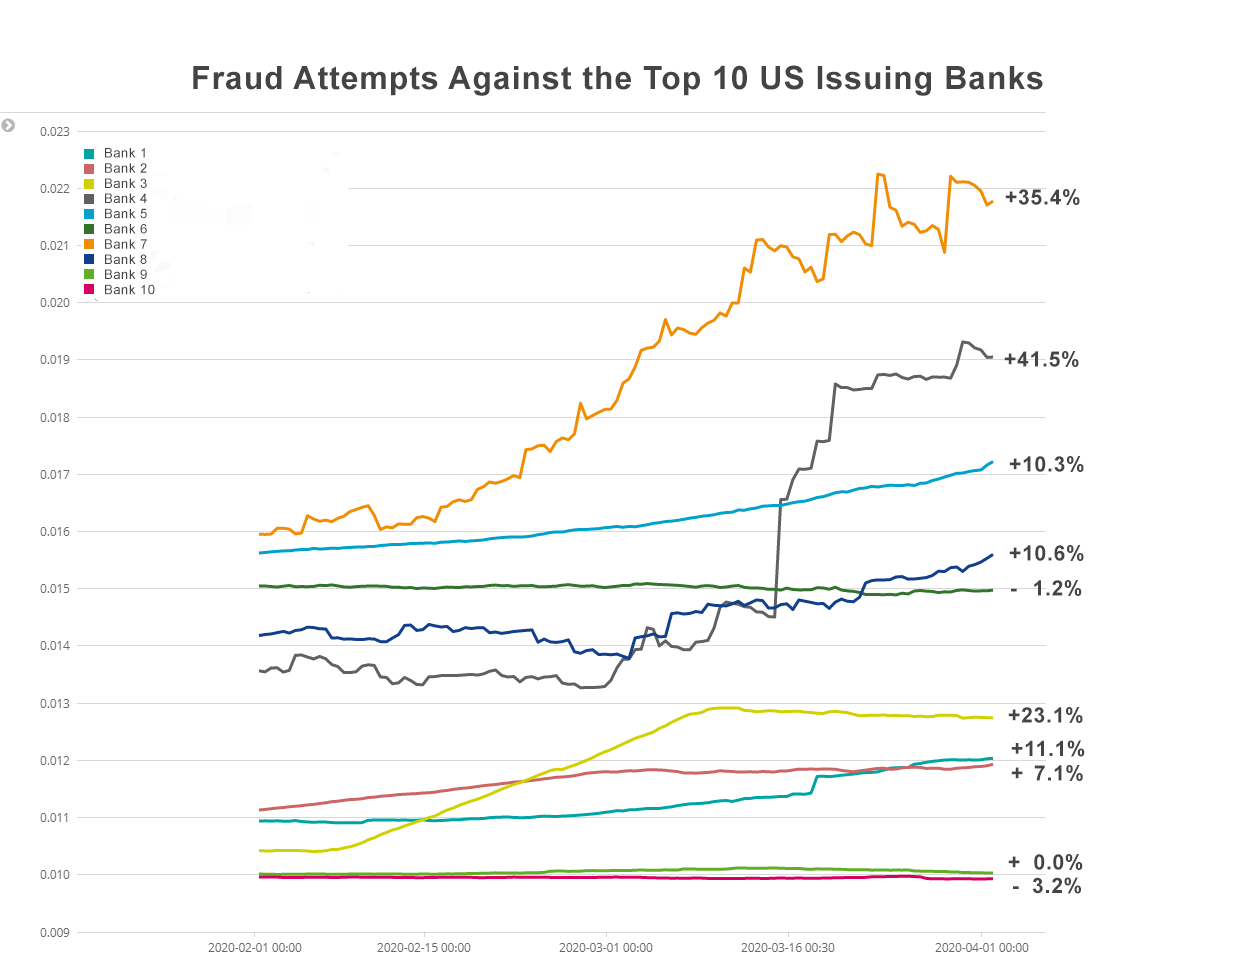 Banking Fraud Cases Rise Amidst COVID-19 - Fraud.net